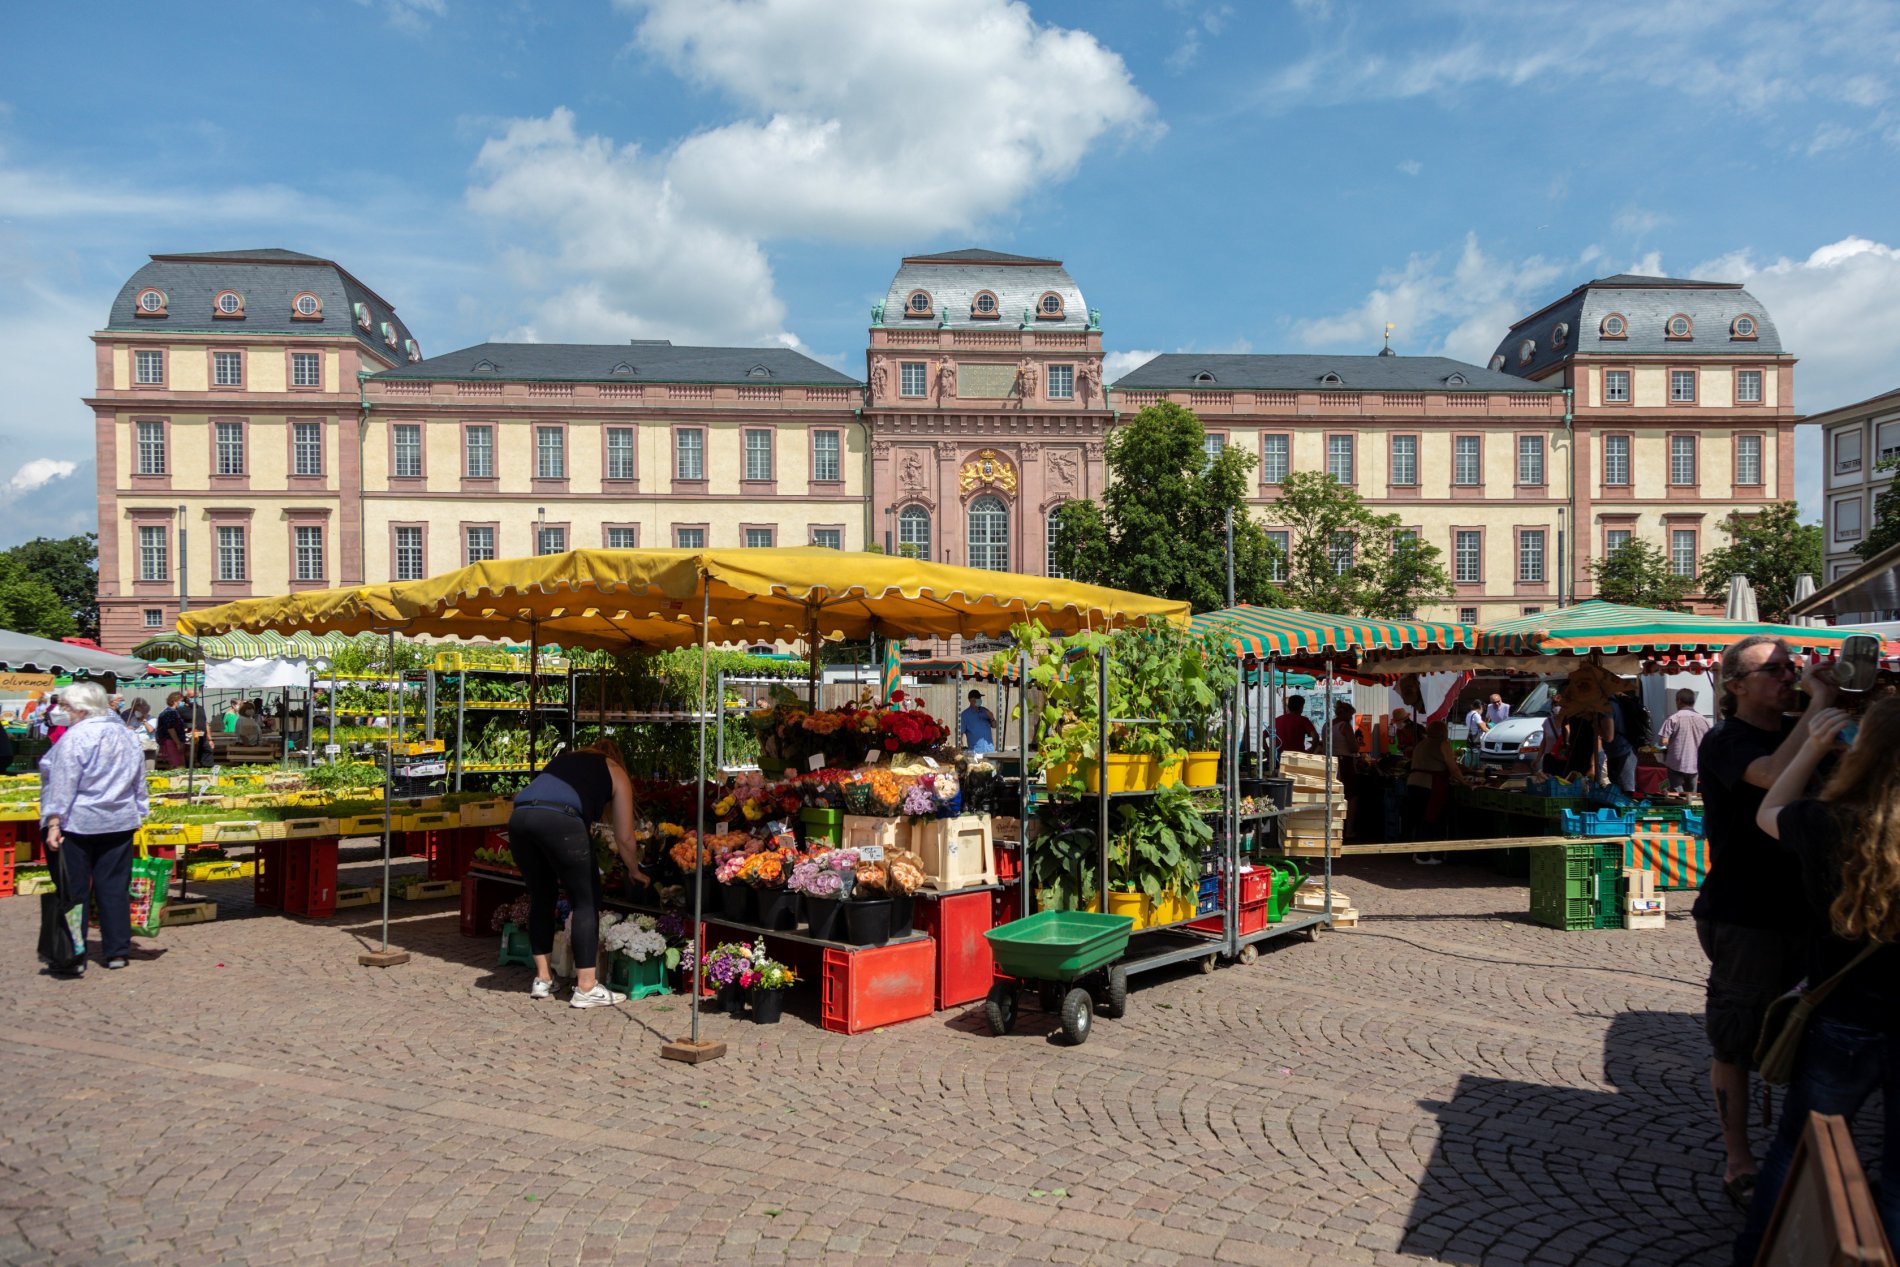 Market stall with plants and flowers, the Residential Palace in the background.